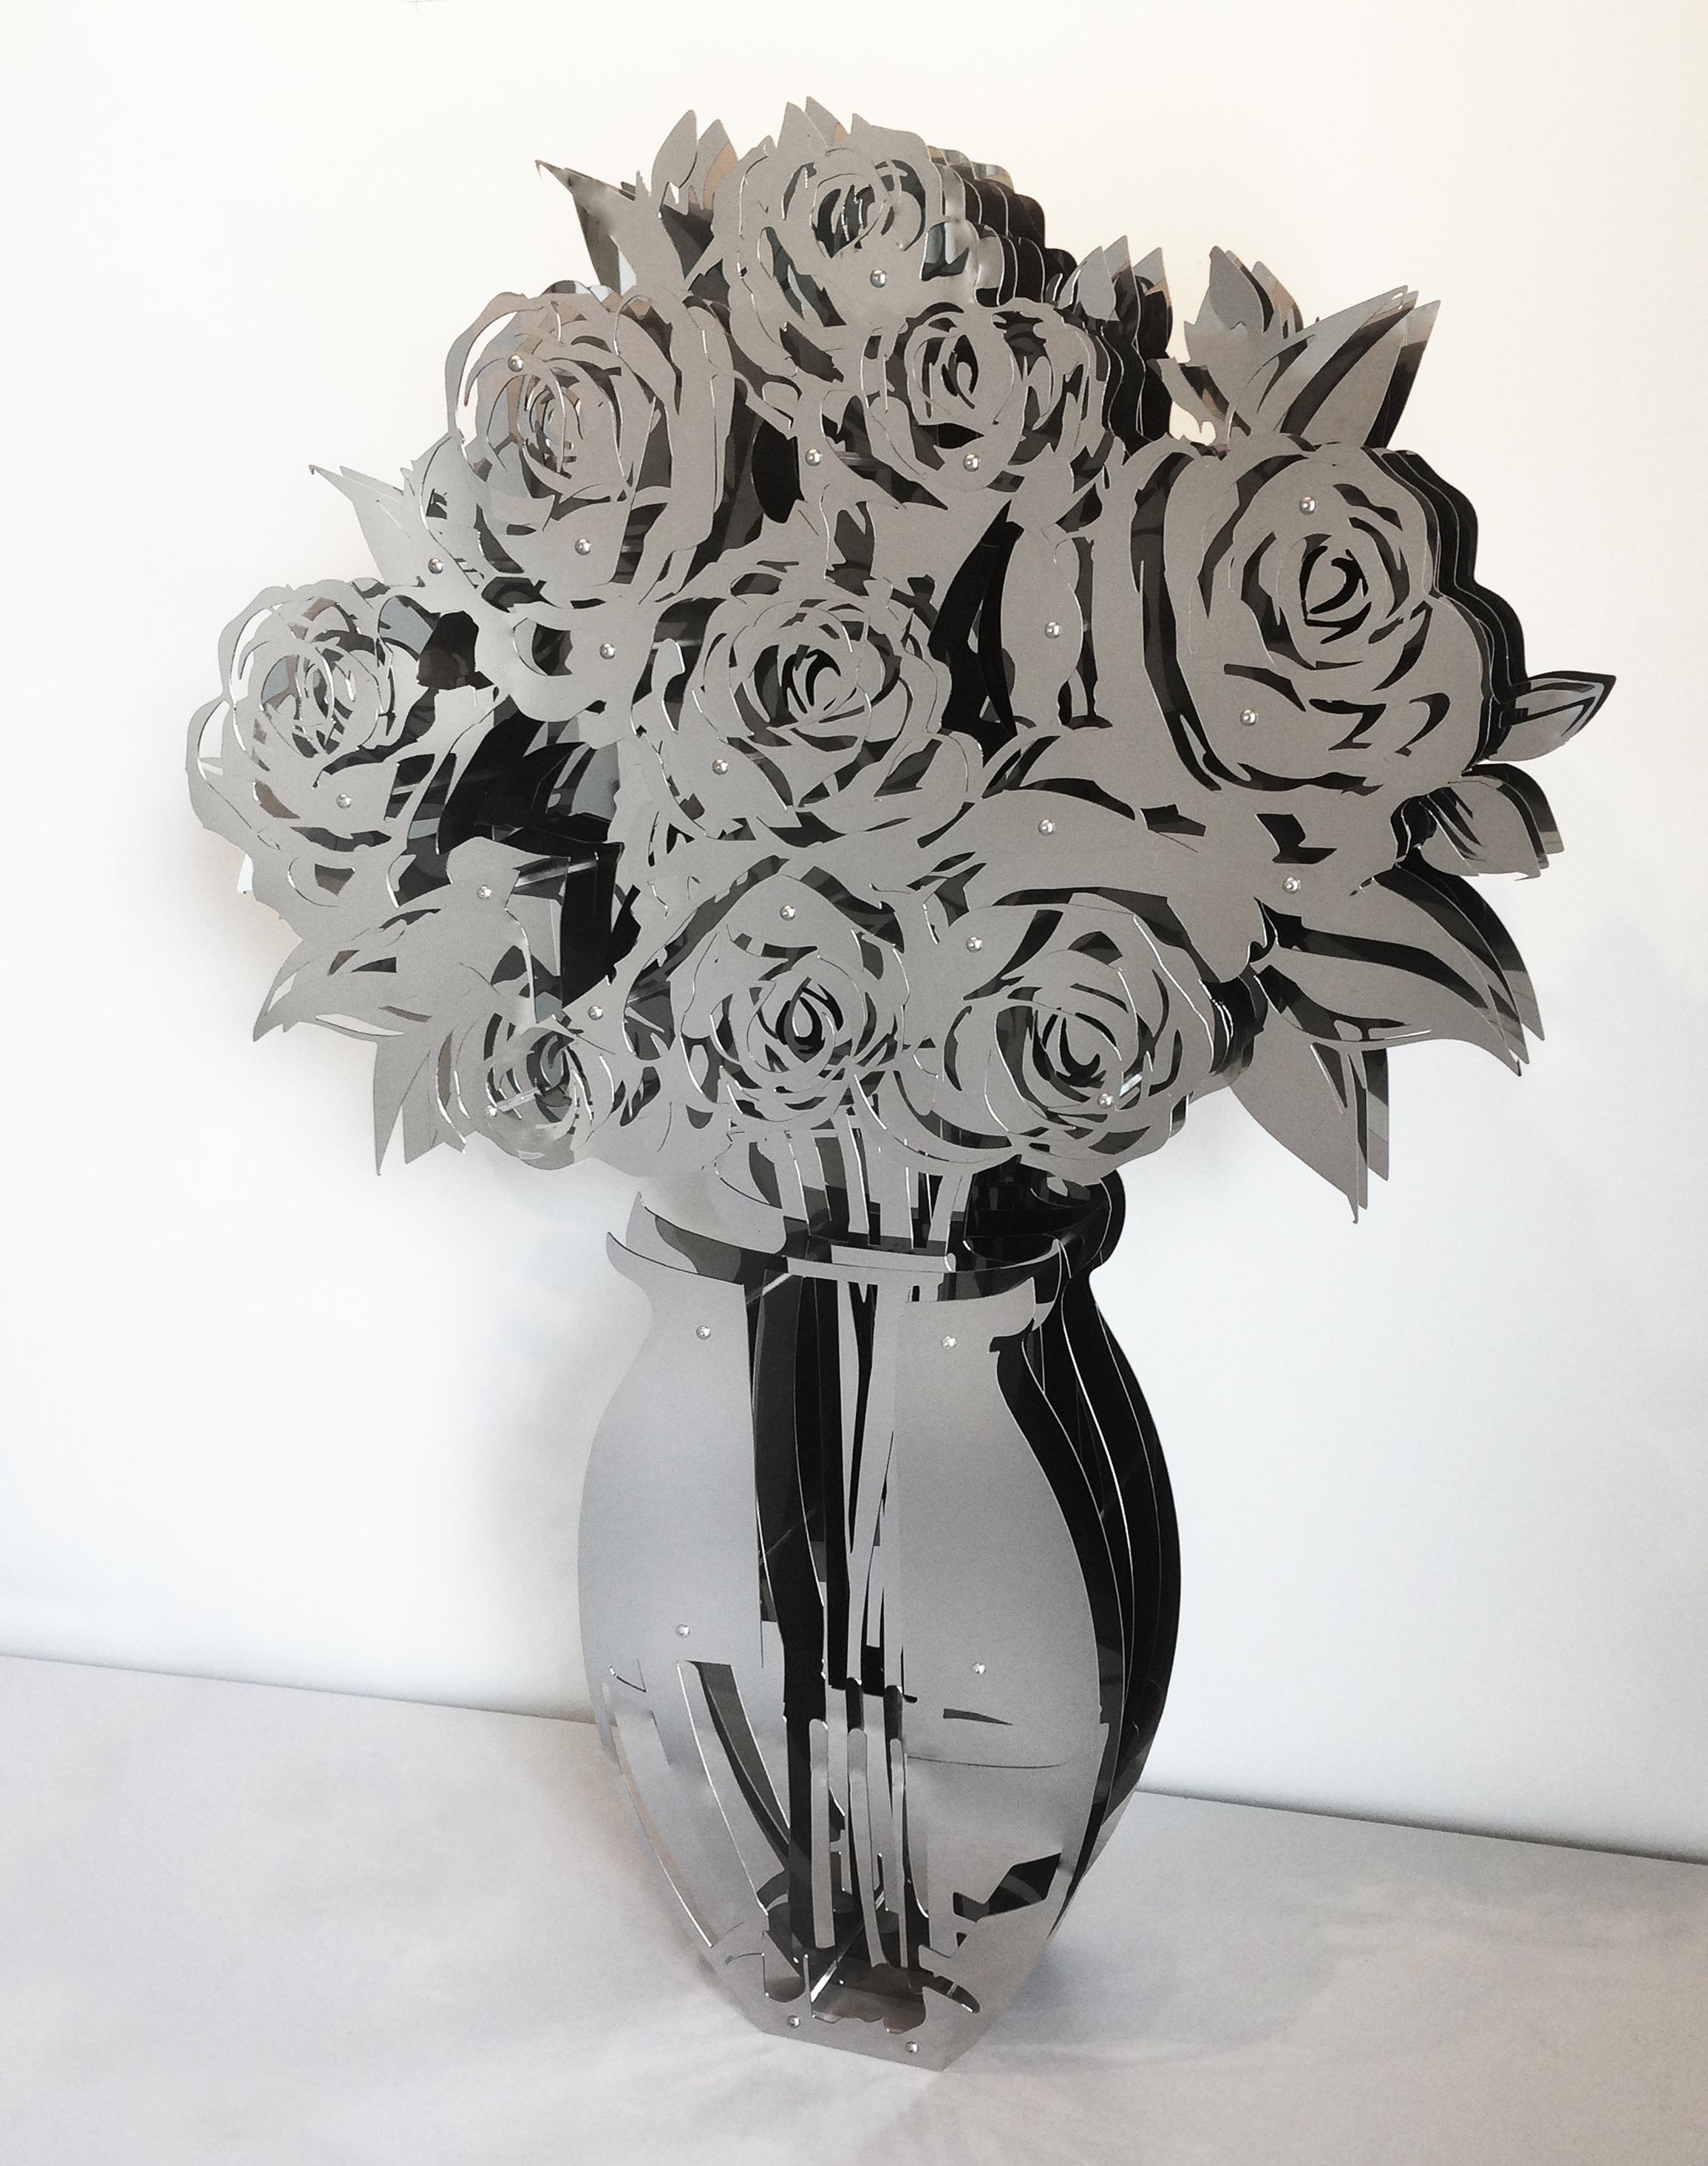 Michael Kalish Abstract Sculpture - Vase of Roses - Mirrored Stainless 60